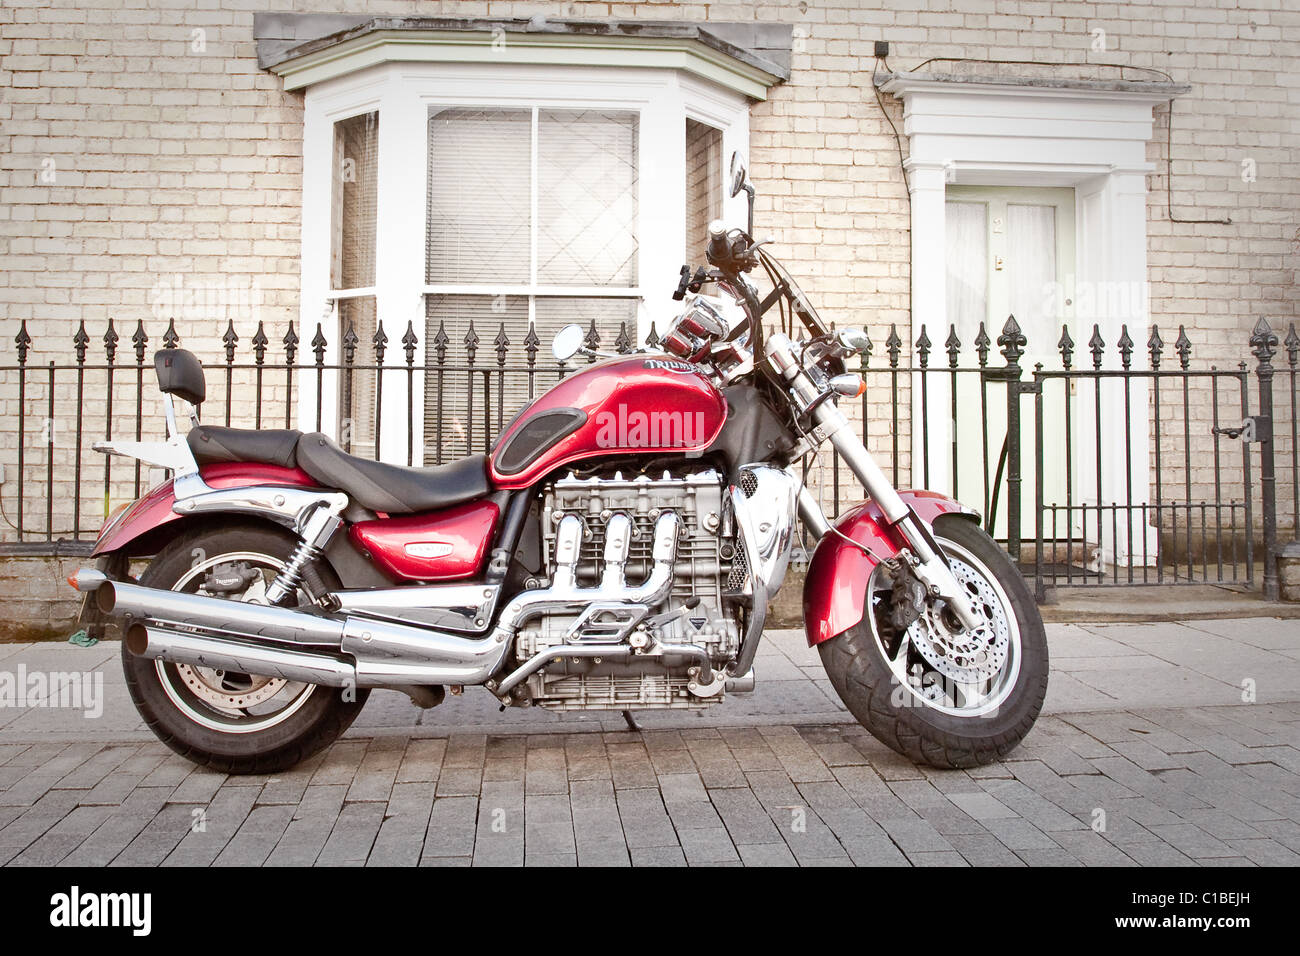 Triumph Motorbike Outside A House In England Stock Photo Alamy